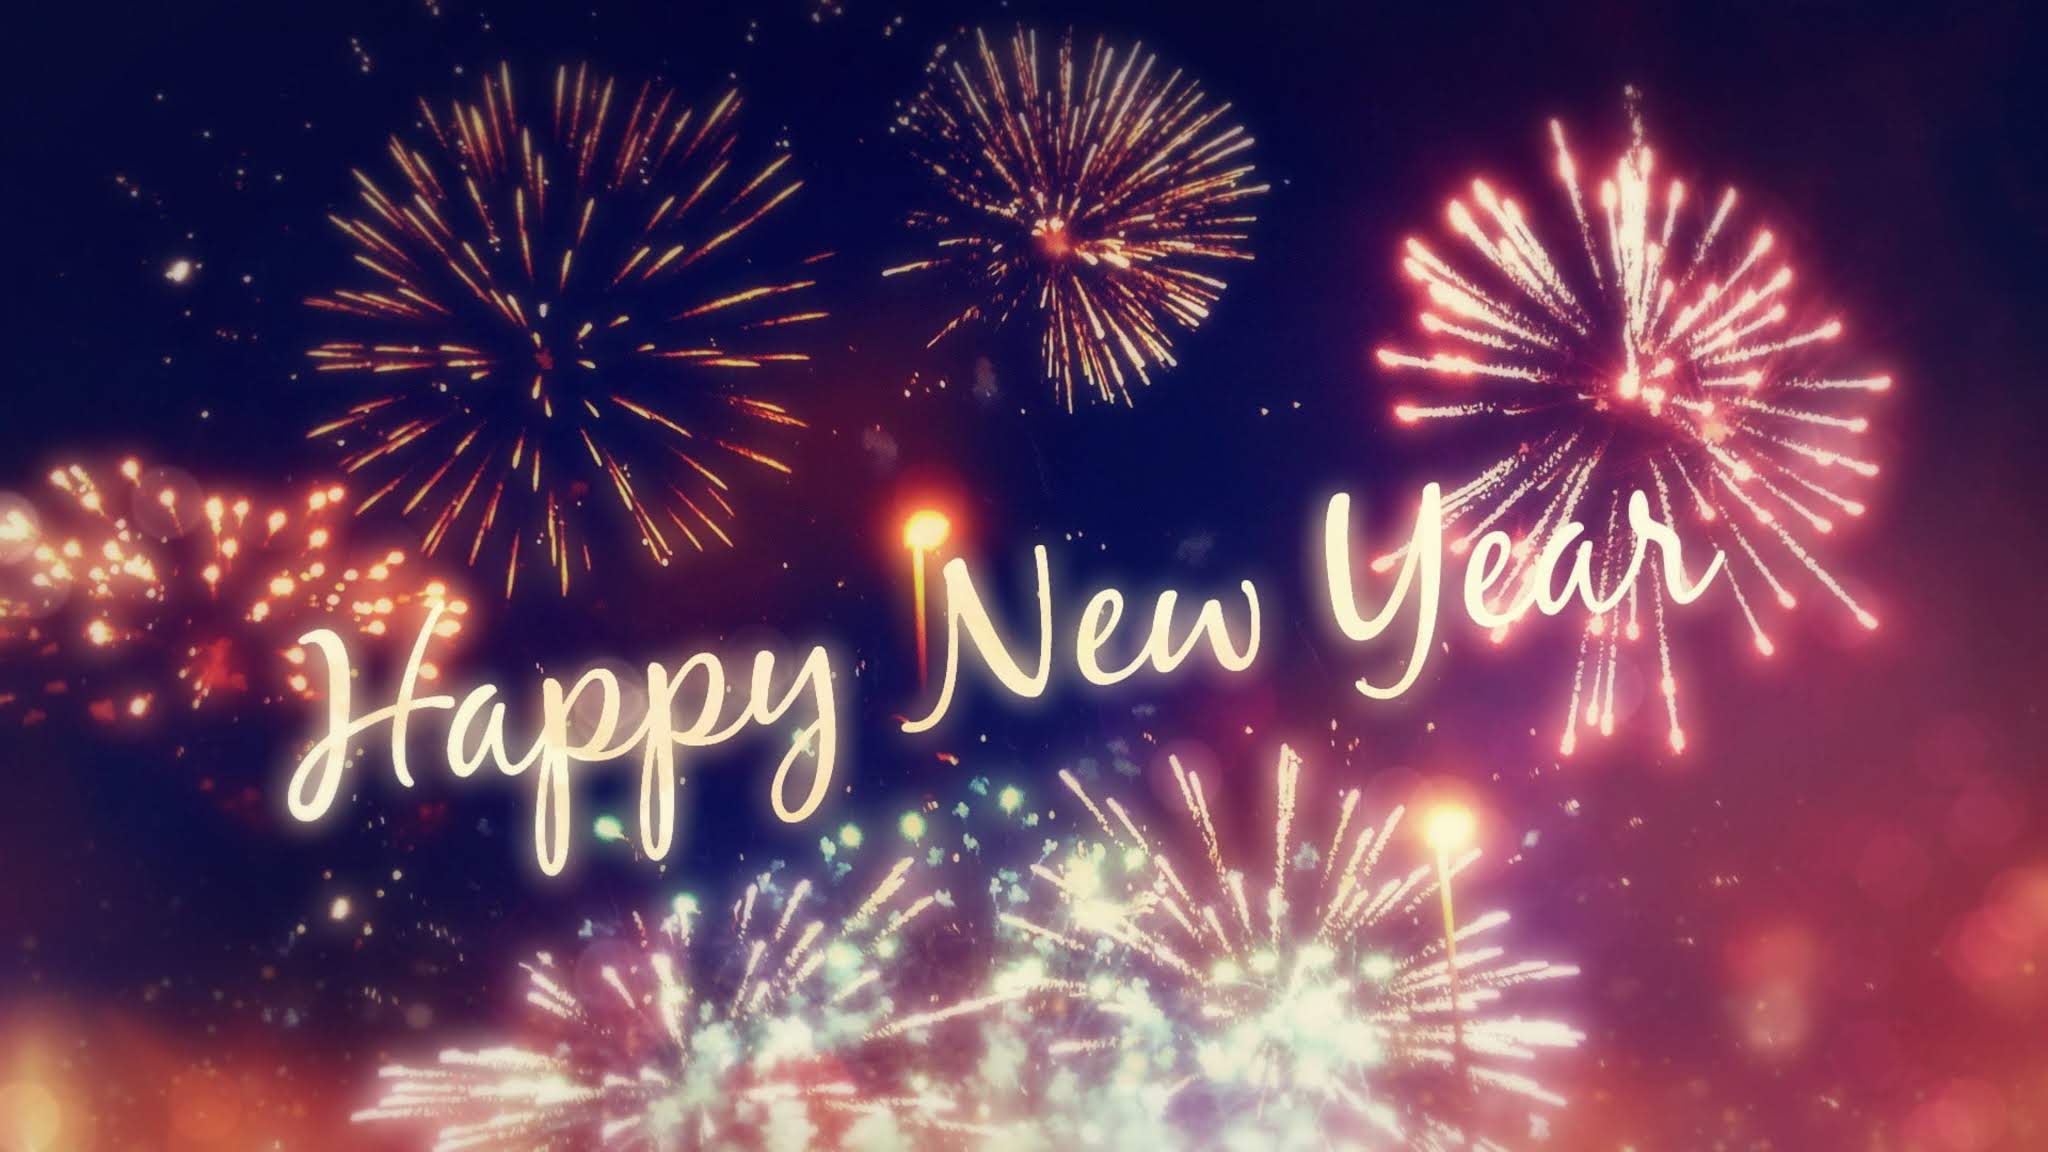 Happy New Year 4k Free Wallpapers for Apple iPhone And Samsung Galaxy.